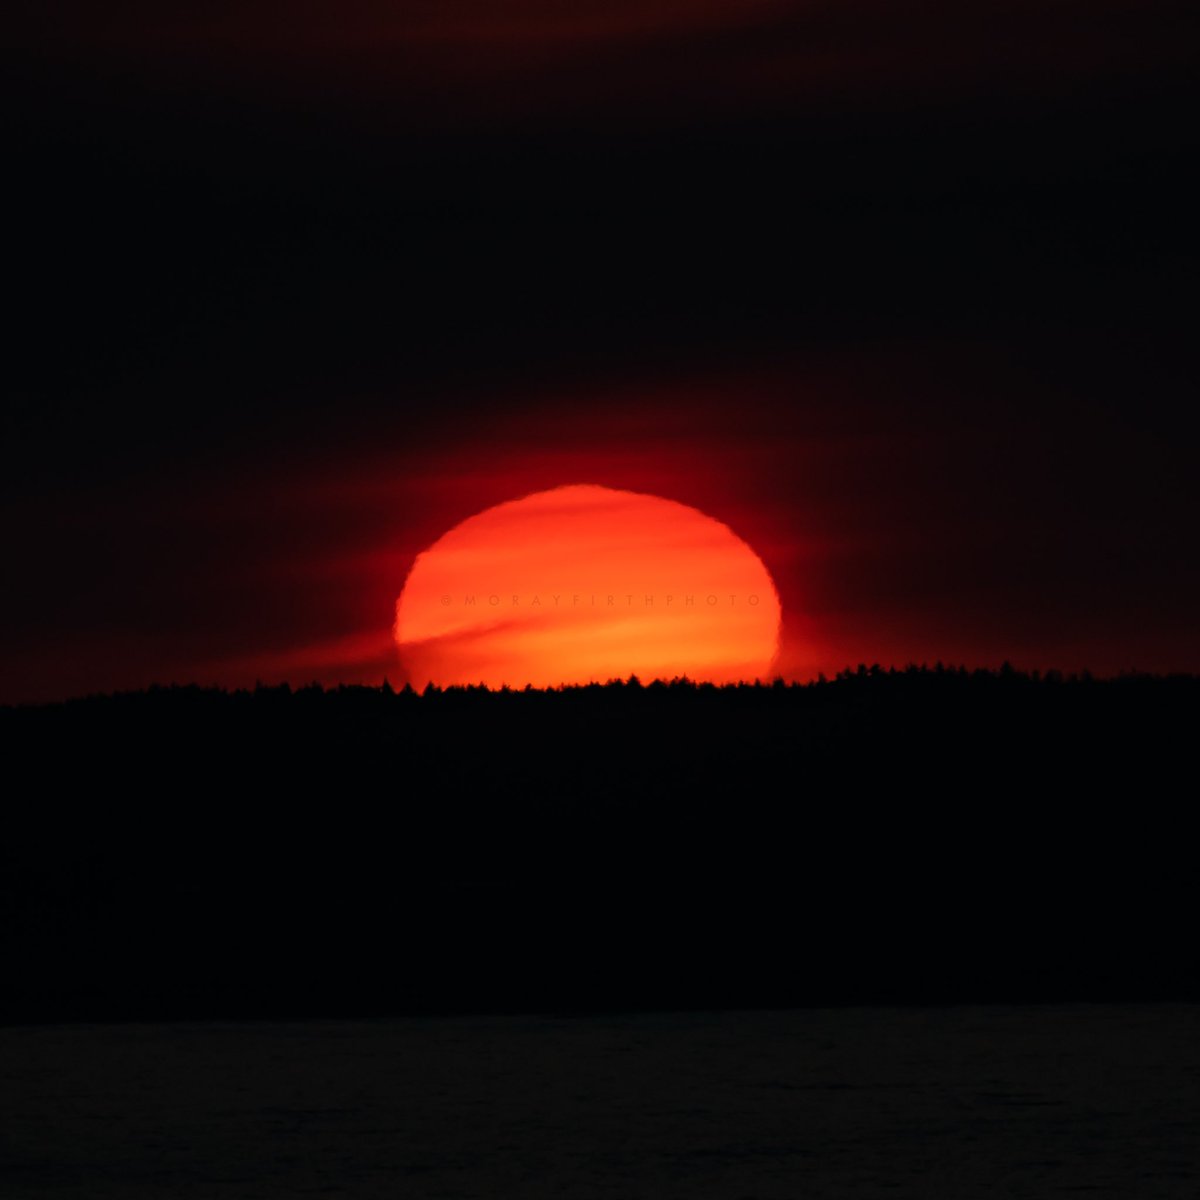 last nights setting sun from wick in caithness, scotland 
•
#sunset #StormHour #ThePhotoHour #scotland #caithness #wick #sigma150600mm #sonyalpha #scottishhighlands #northcoast500